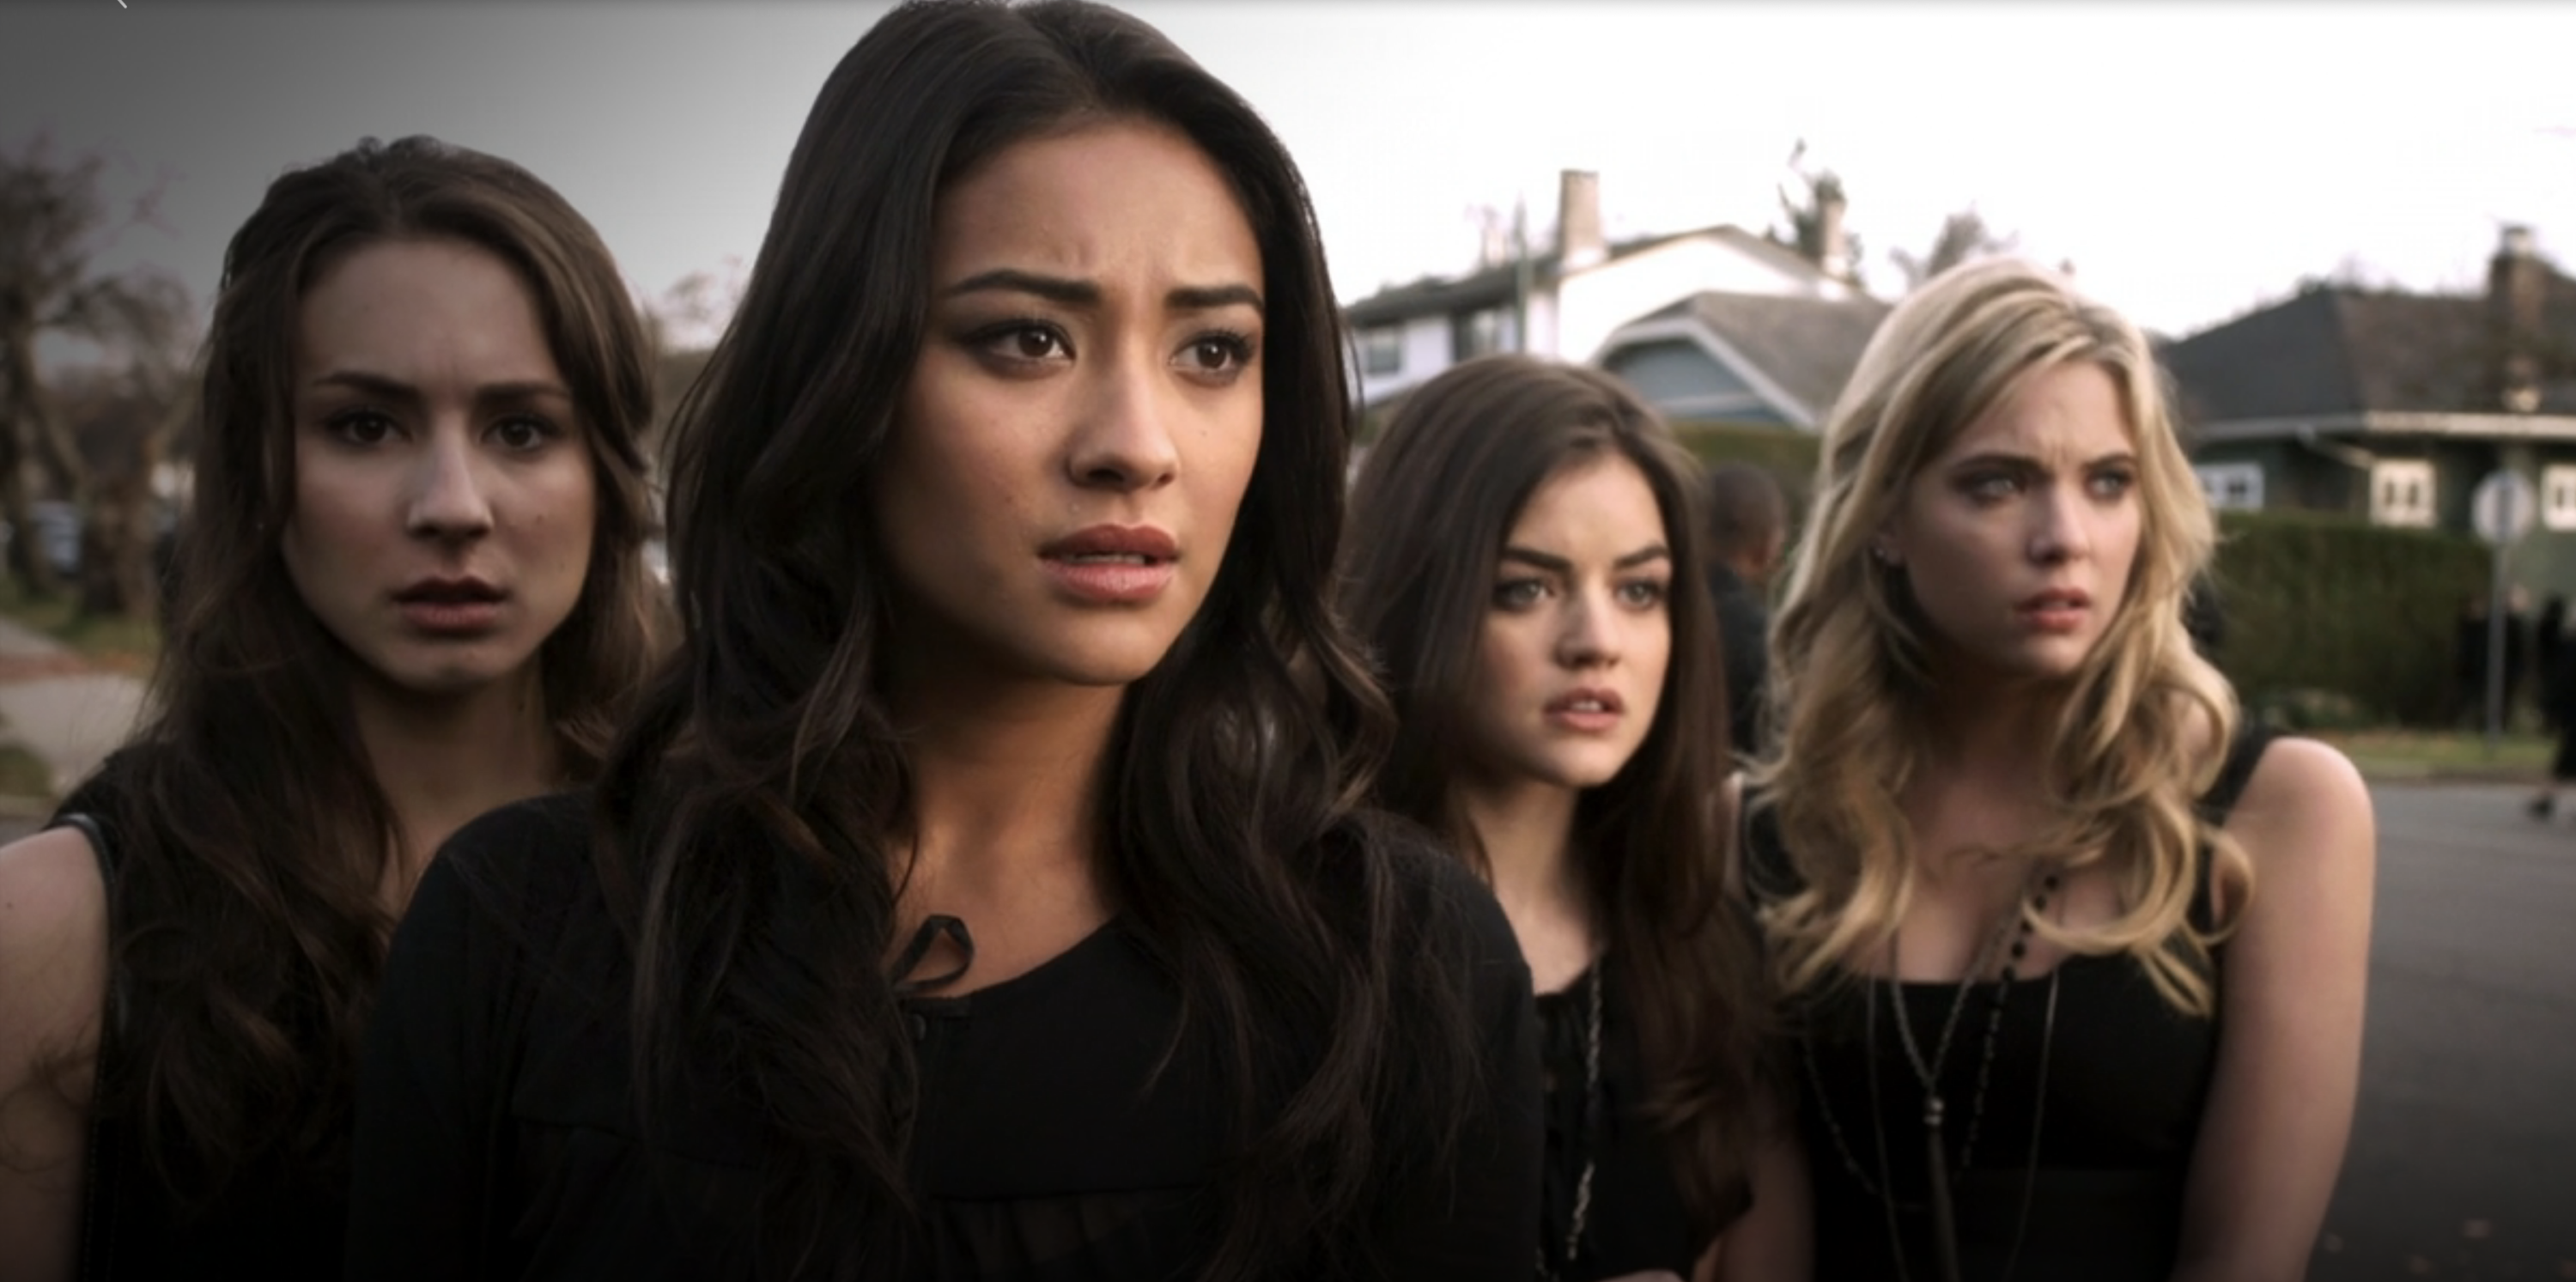 Screen shot from &quot;Pretty Little Liars&quot;